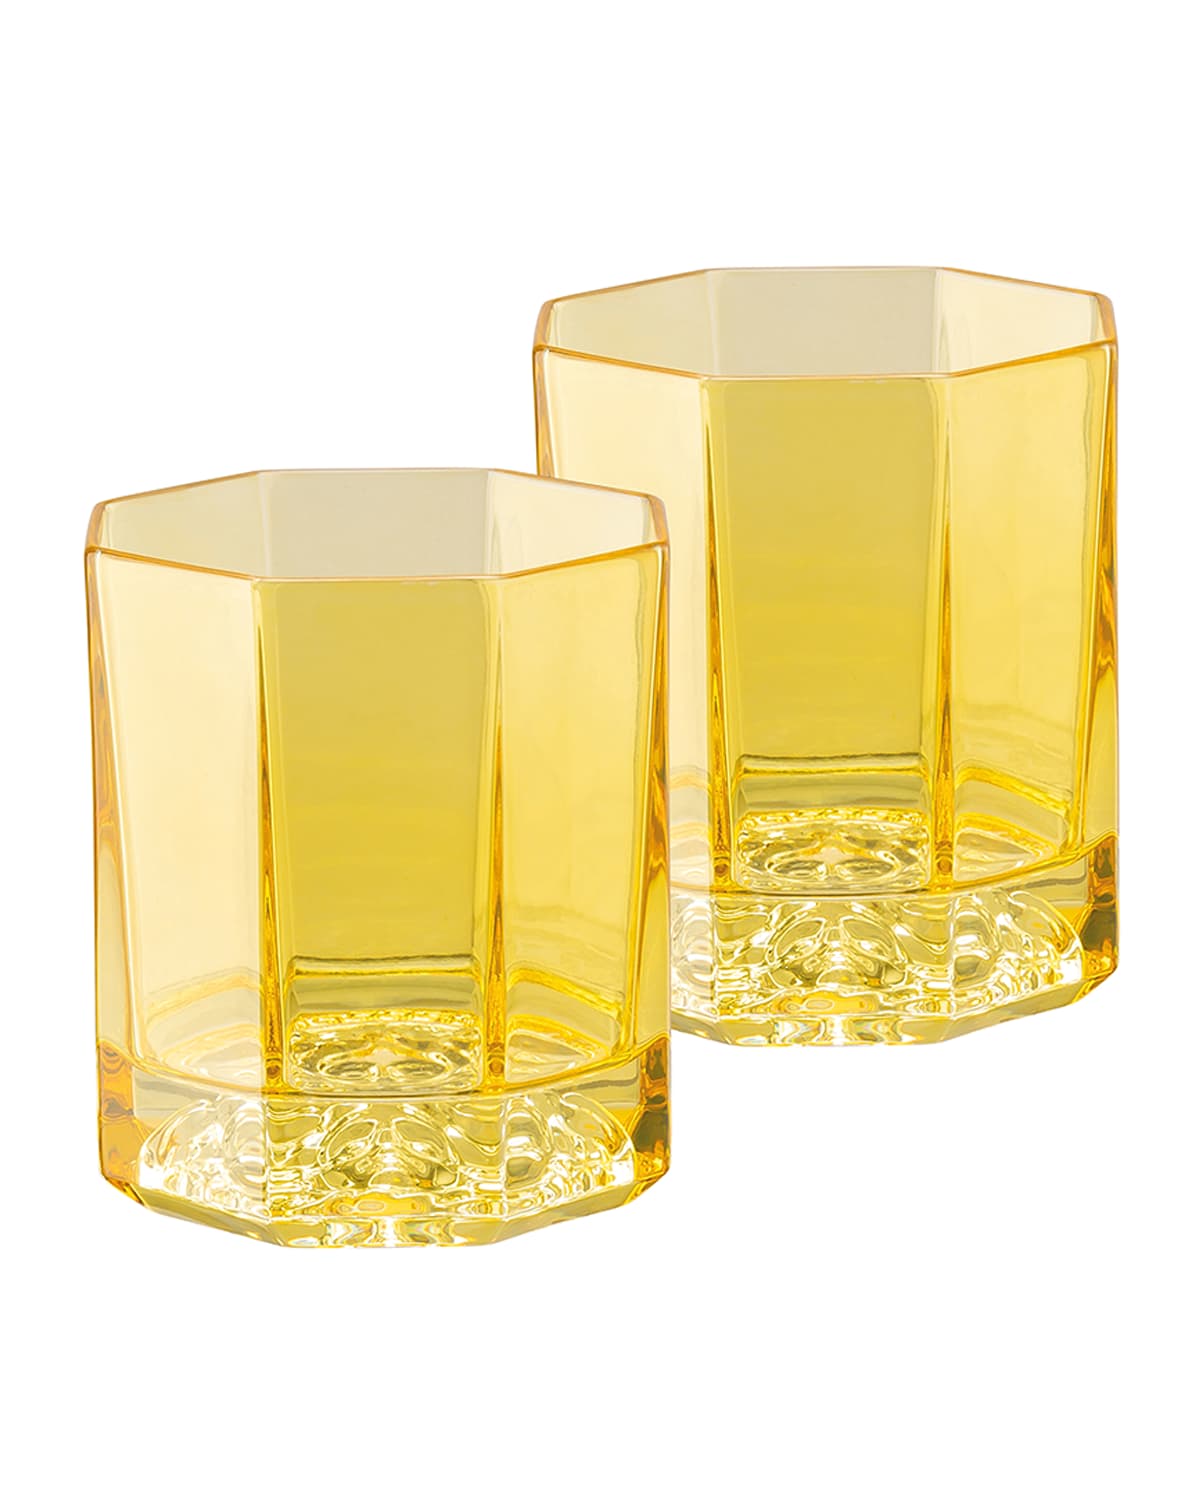 VERSACE MEDUSA LUMIERE AMBER WHISKEY DOUBLE OLD FASHIONED GLASSES, SET OF 2,PROD225650128